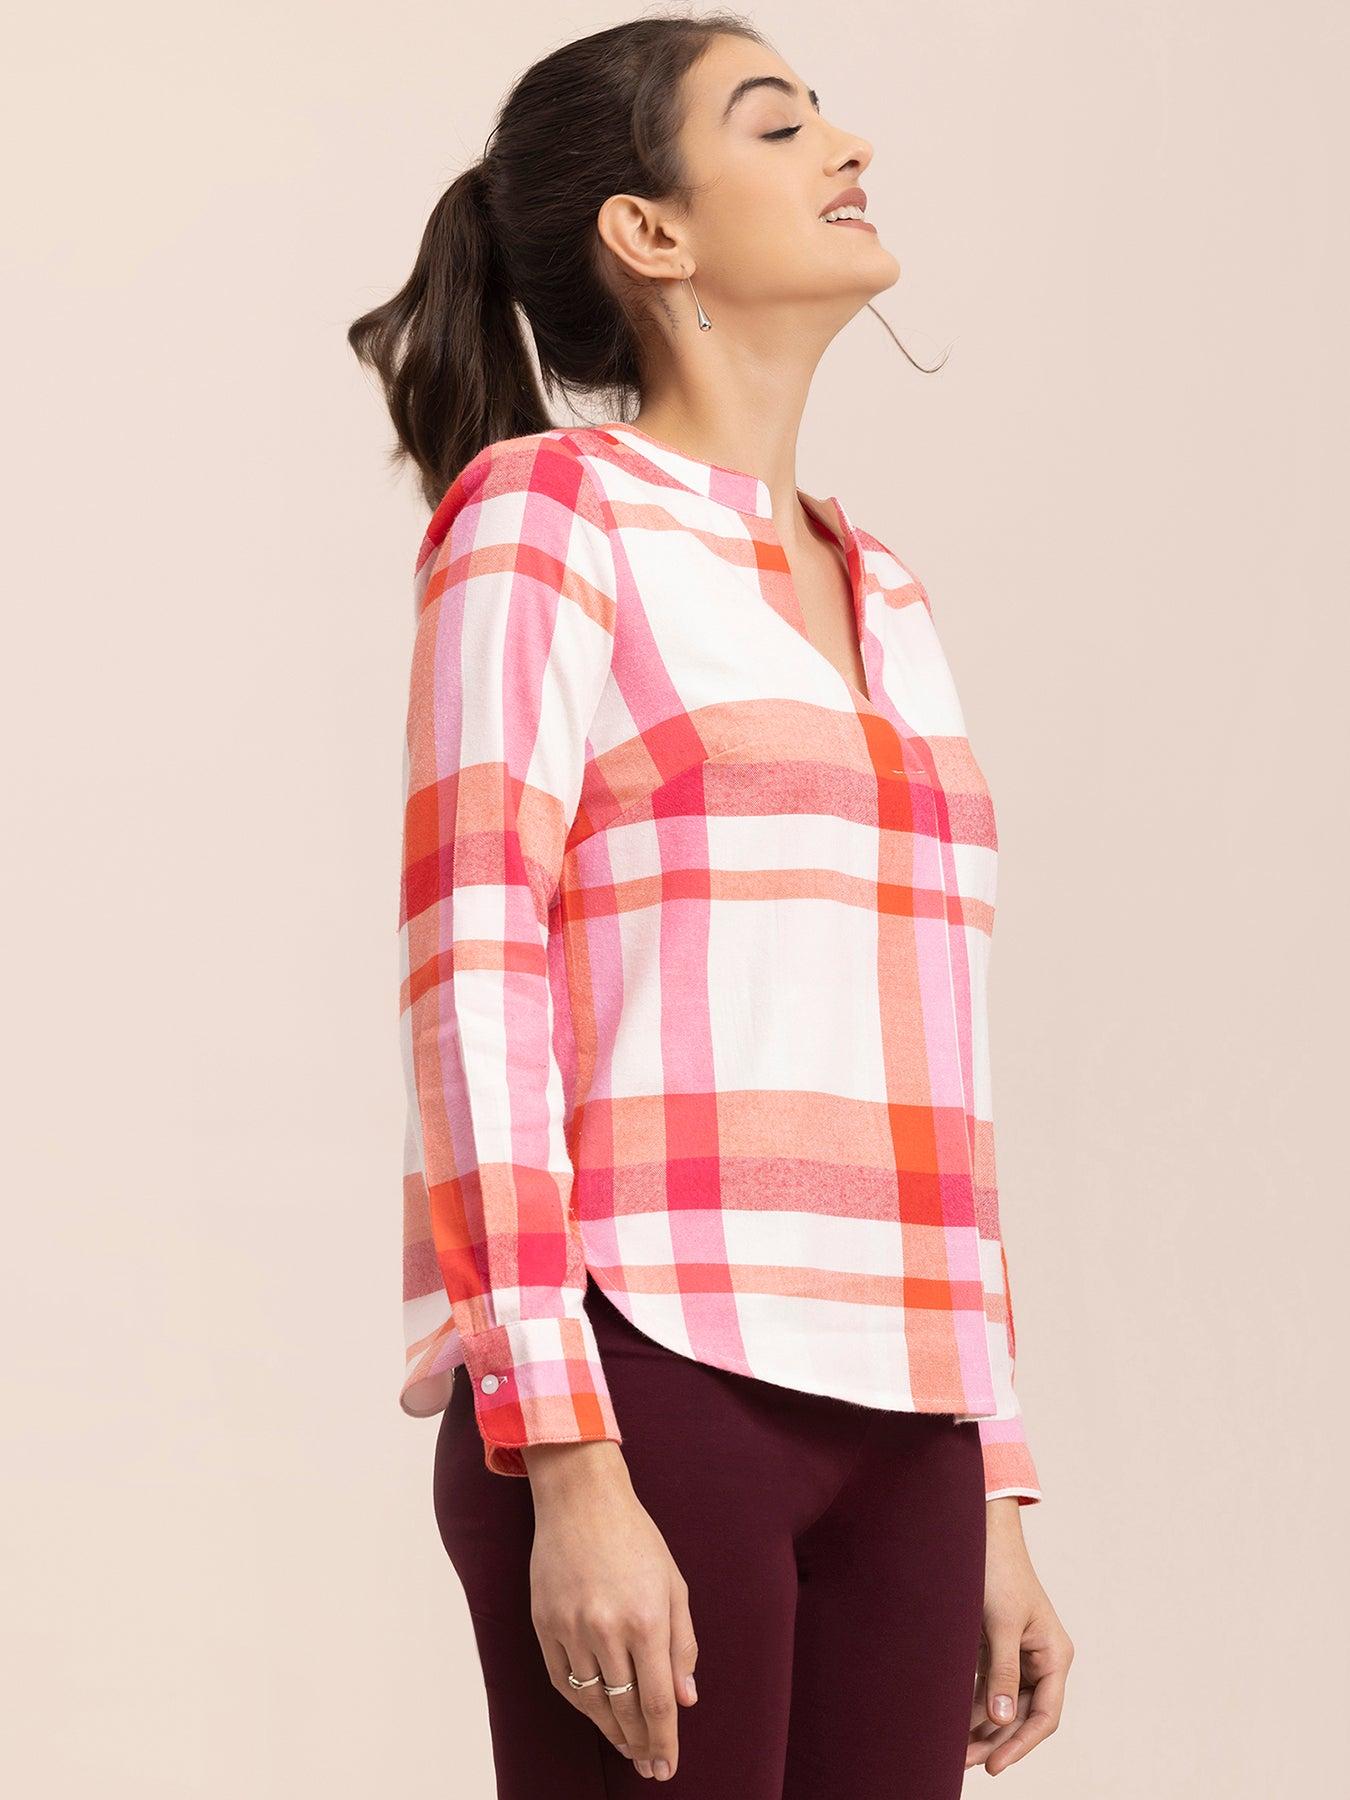 Cotton Checkered Top - White and Pink| Formal Tops